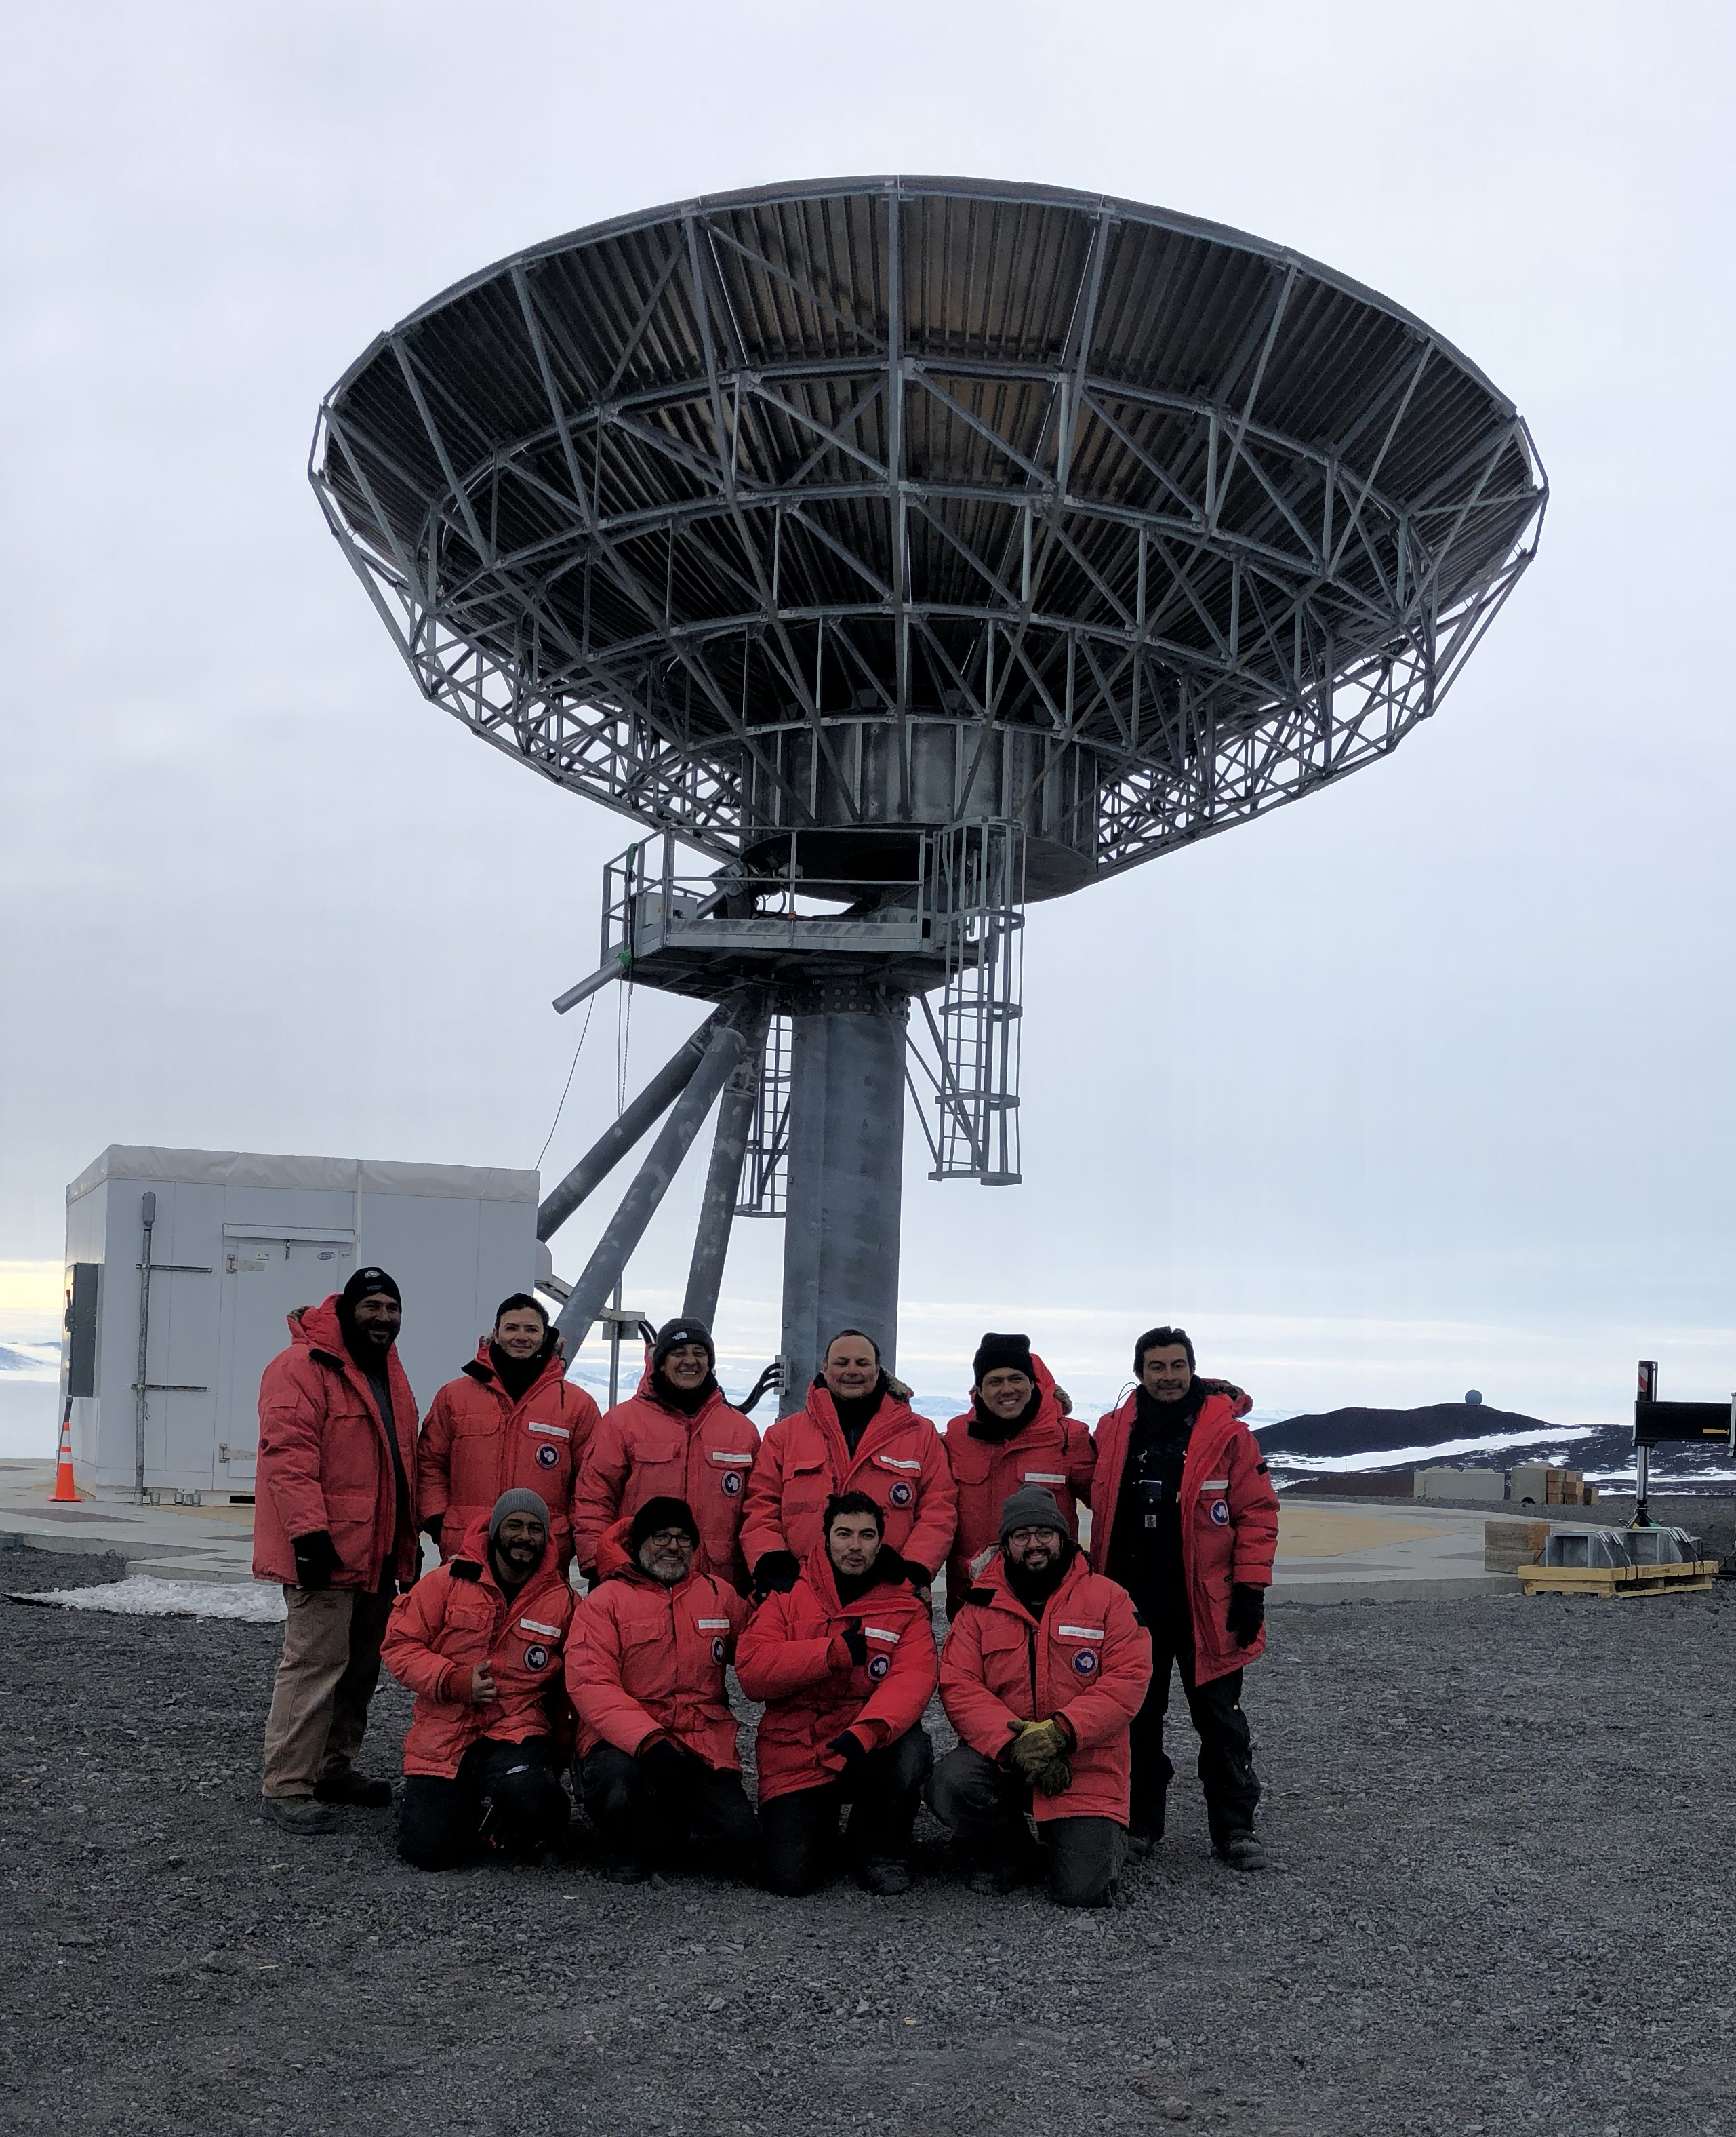 Ten men in red parkas pose for a photo in front of a satellite communications dish.